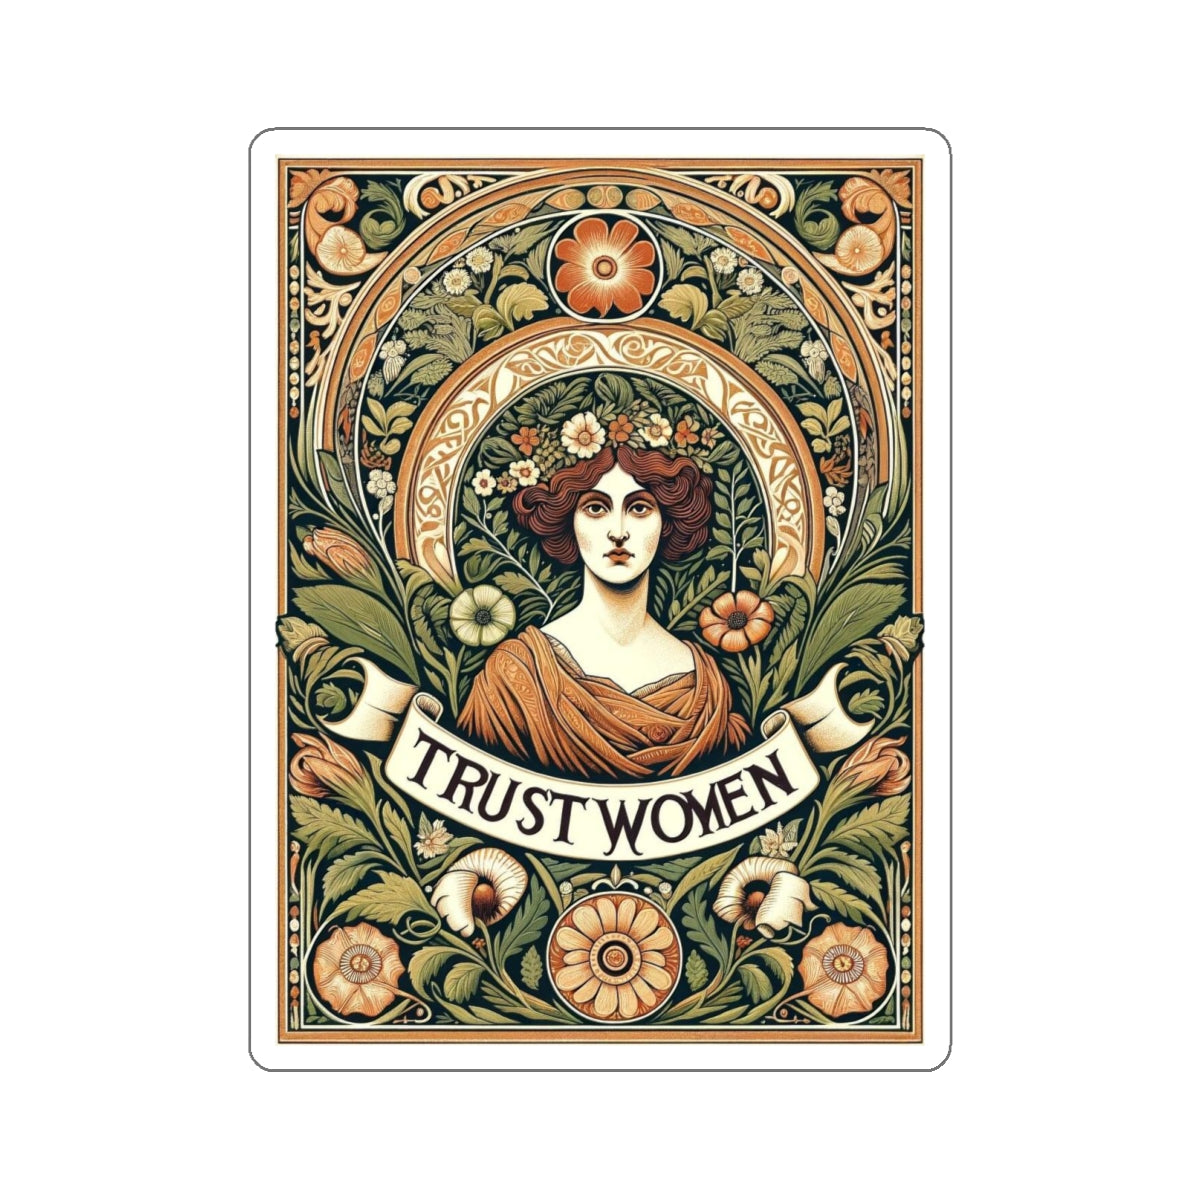 Inspirational Statement vinyl Sticker/Decal: Trust Women! for laptop, kindle, phone, ipad, instrument case, notebook, mood board, or wall